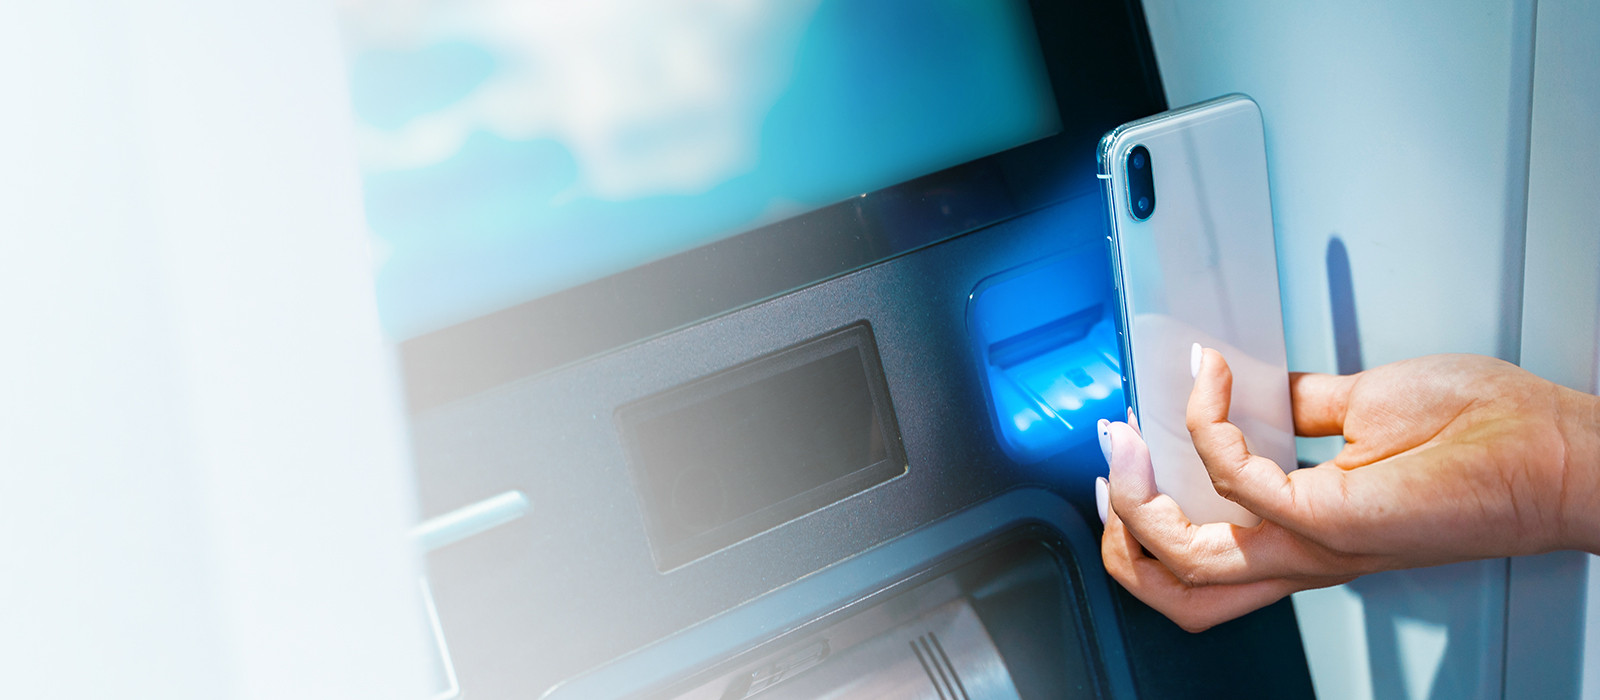 Mobile phone being held in front of  an ATM machine to be scanned